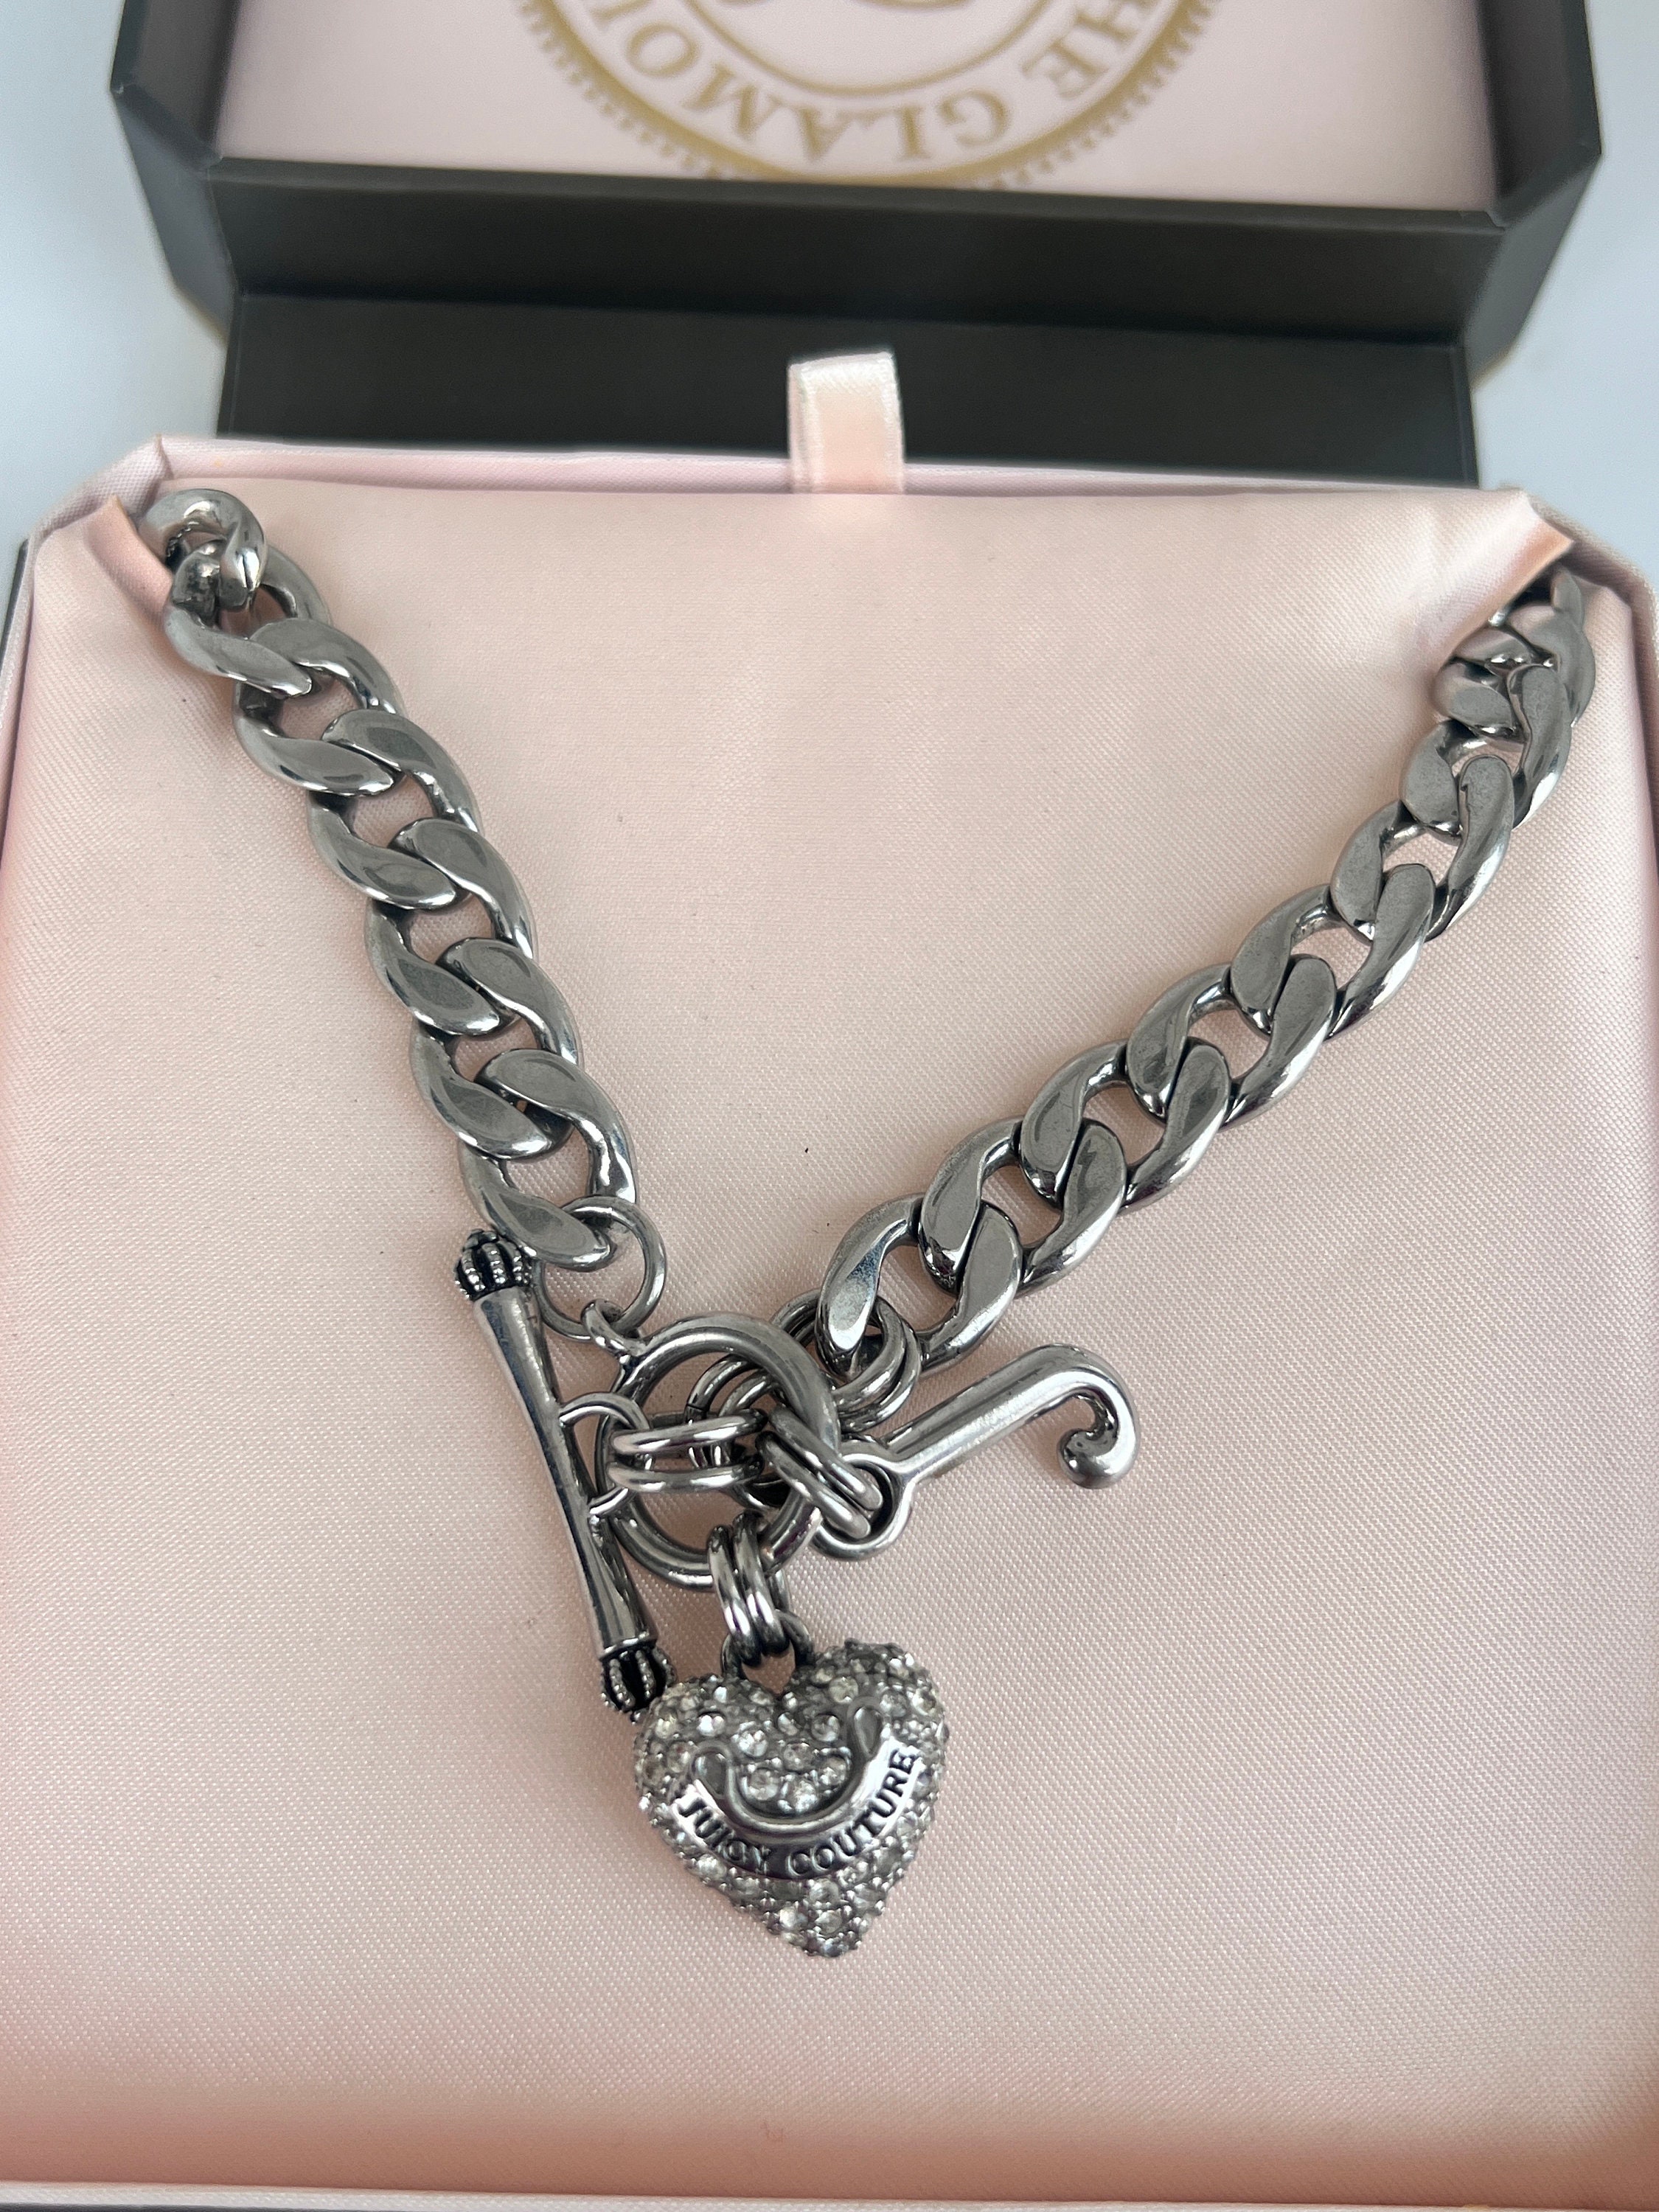 NWT Juicy Couture Pave PUFFED HEART Long Necklace 